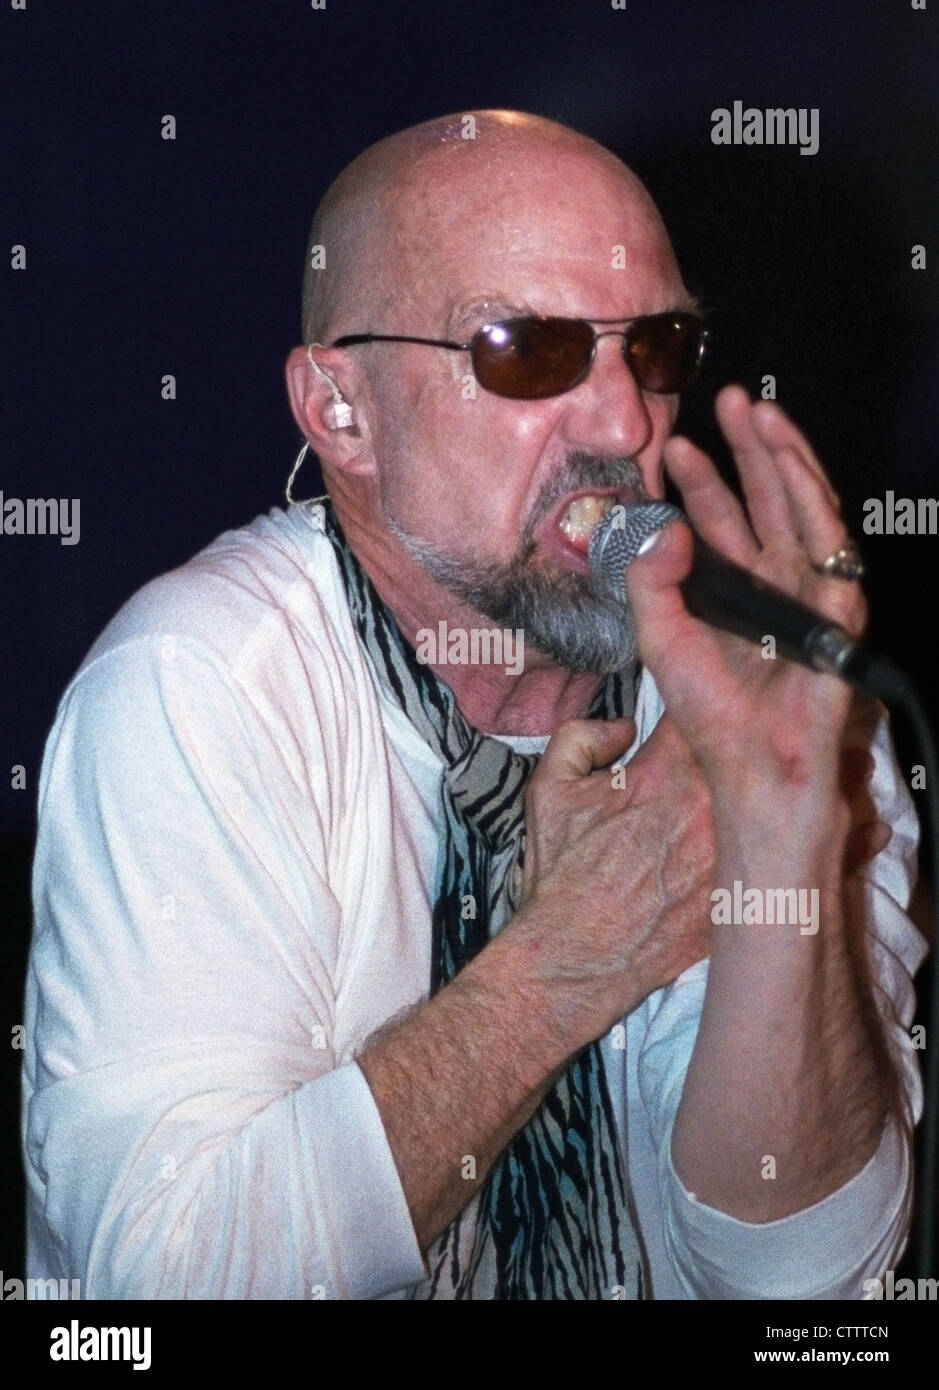 John French, known as Drumbo, singing with the Magic Band at the Sugarmill, Stoke, May 2005 Stock Photo